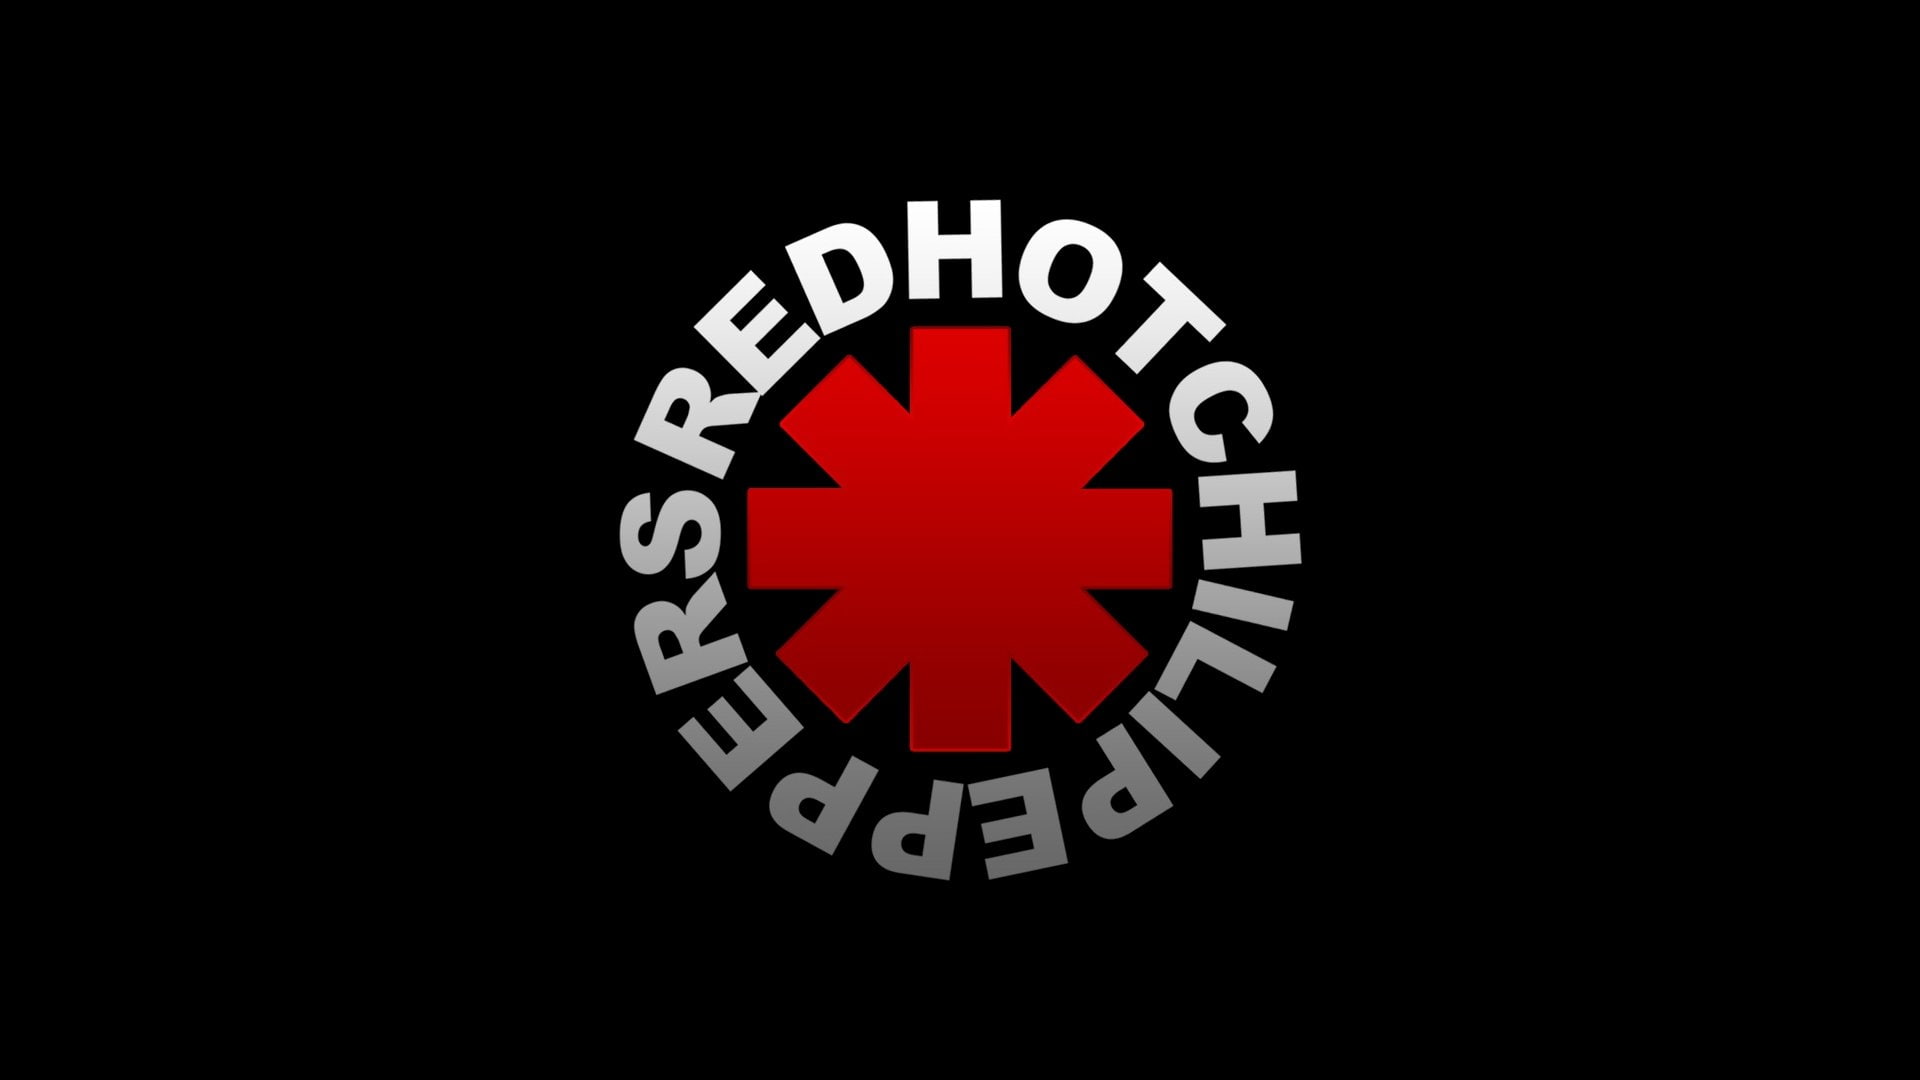 Band (Music), Red Hot Chili Peppers, black background, communication